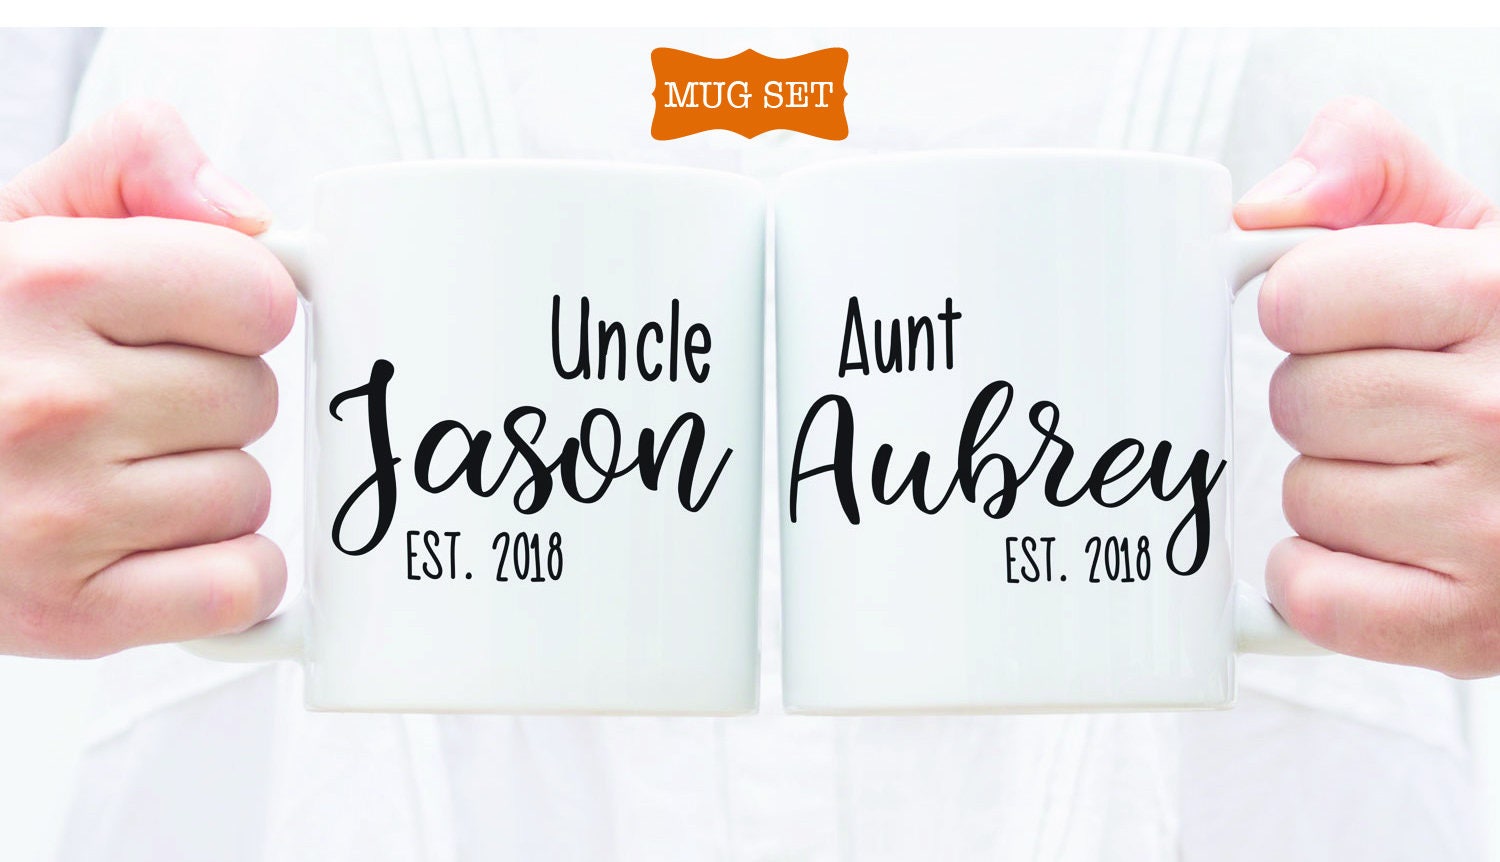 Aunt and Uncle Pregnancy announcement Mug Set Baby Reveal | Etsy